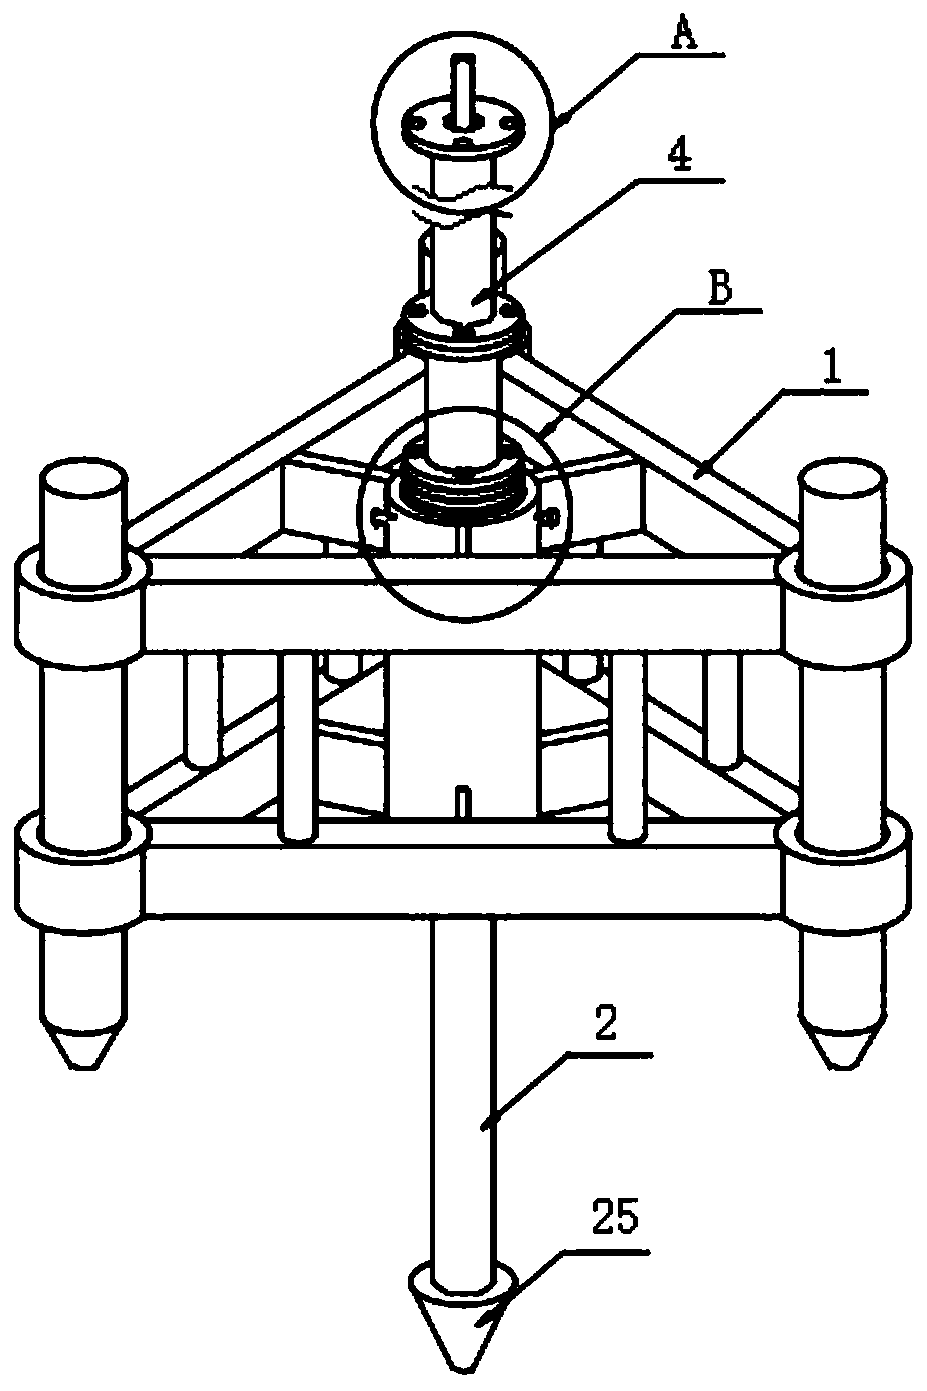 Anchor rod construction device for building engineering